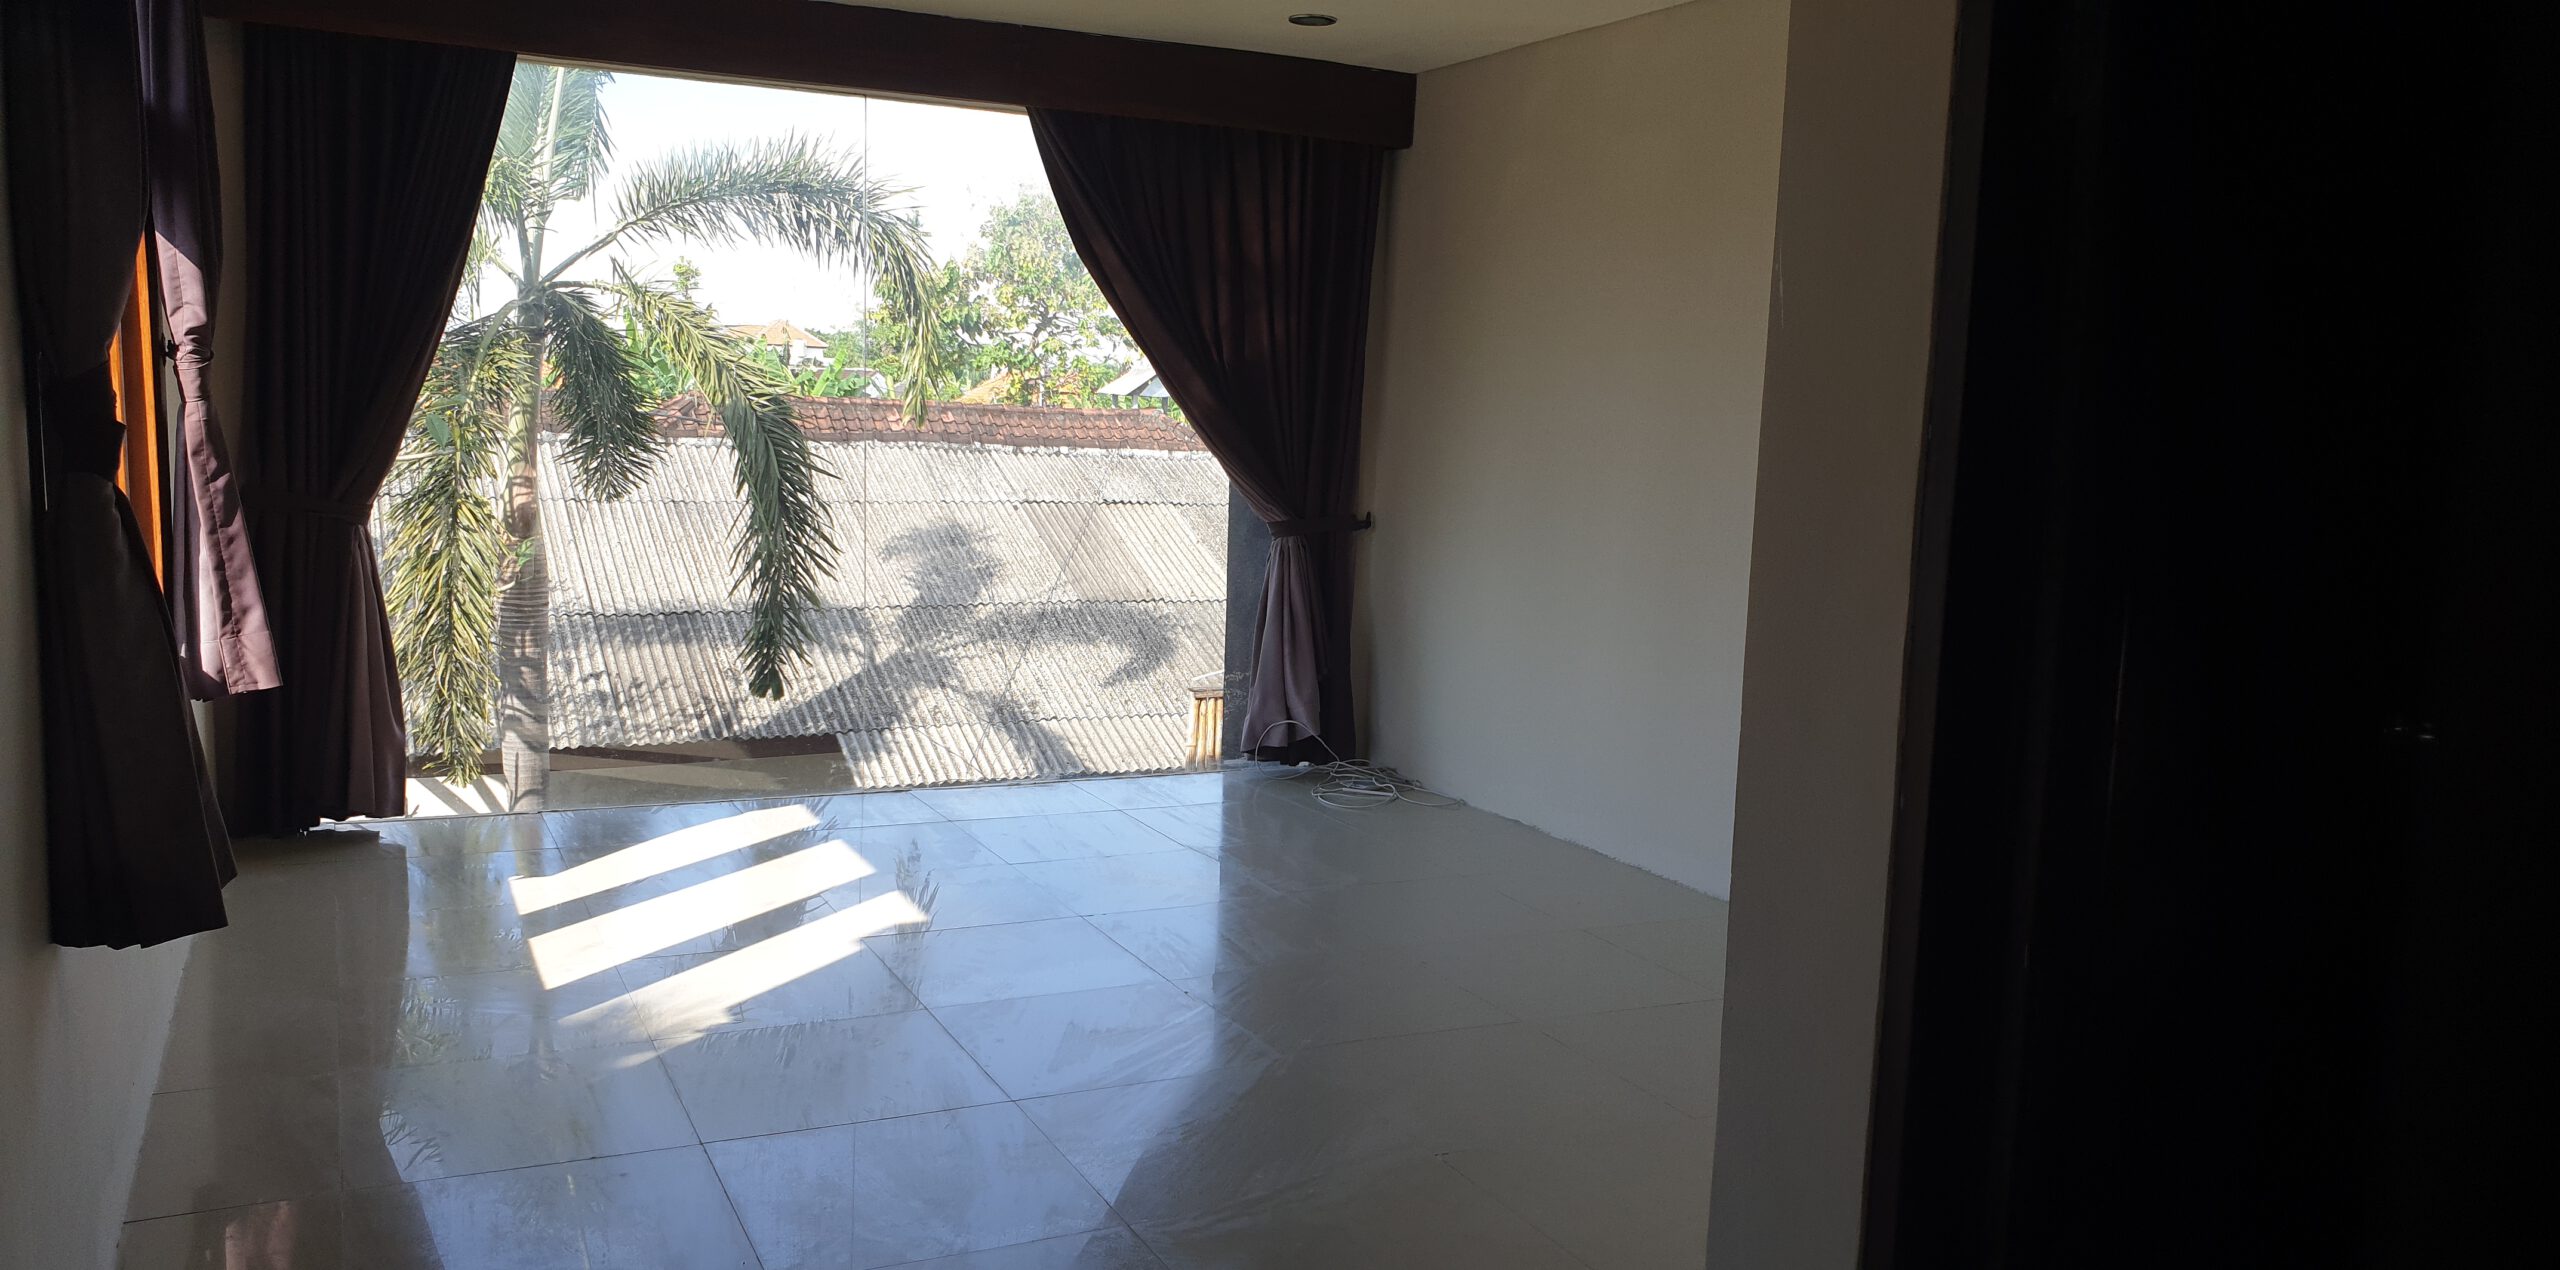 2-bedroom House Coco in Sanur